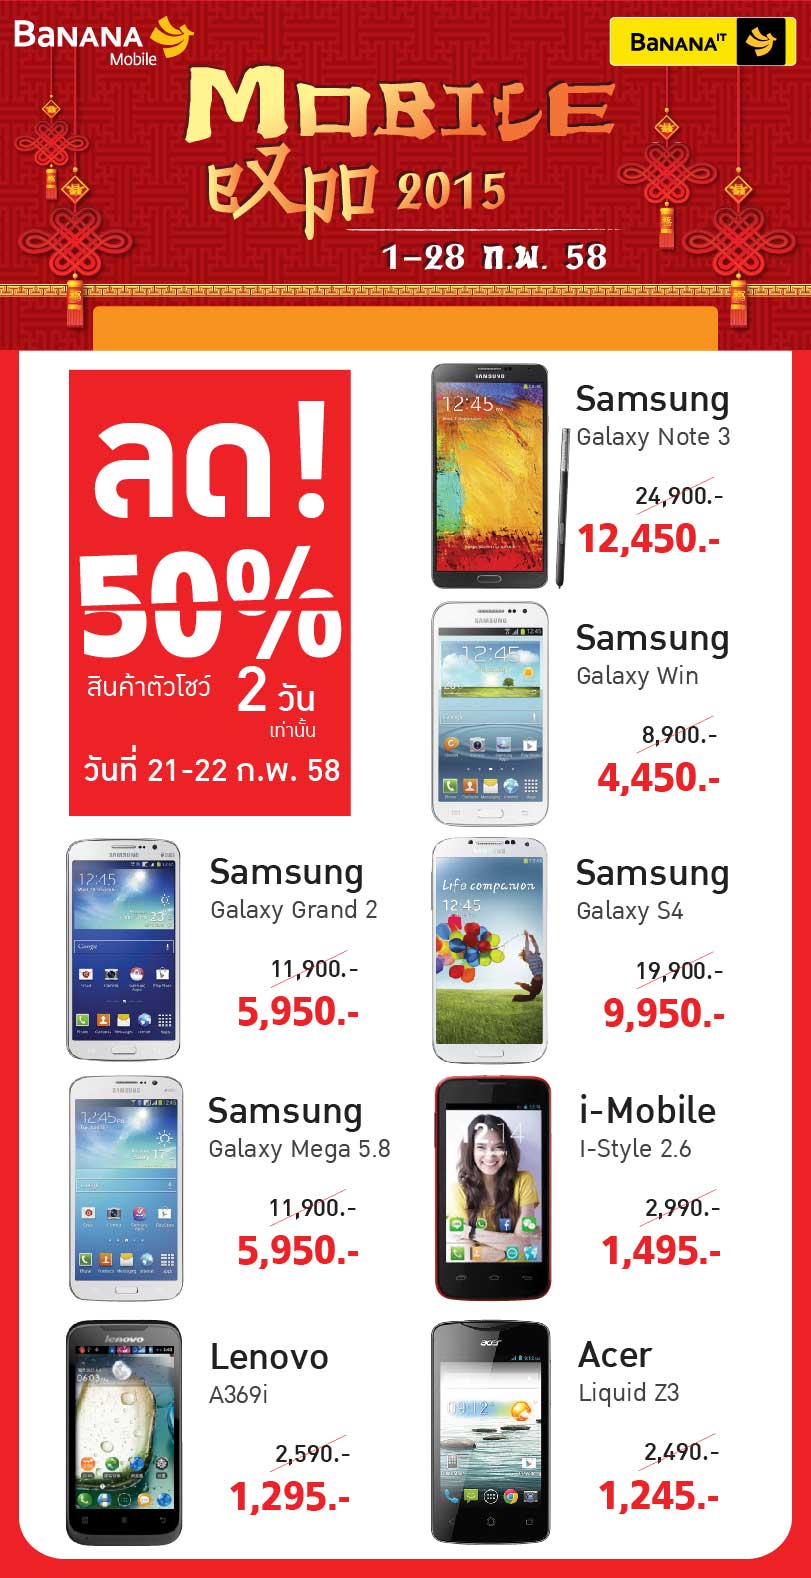 Benner Promotion Mobile Expo 2015_discount smartphone & tablet copy